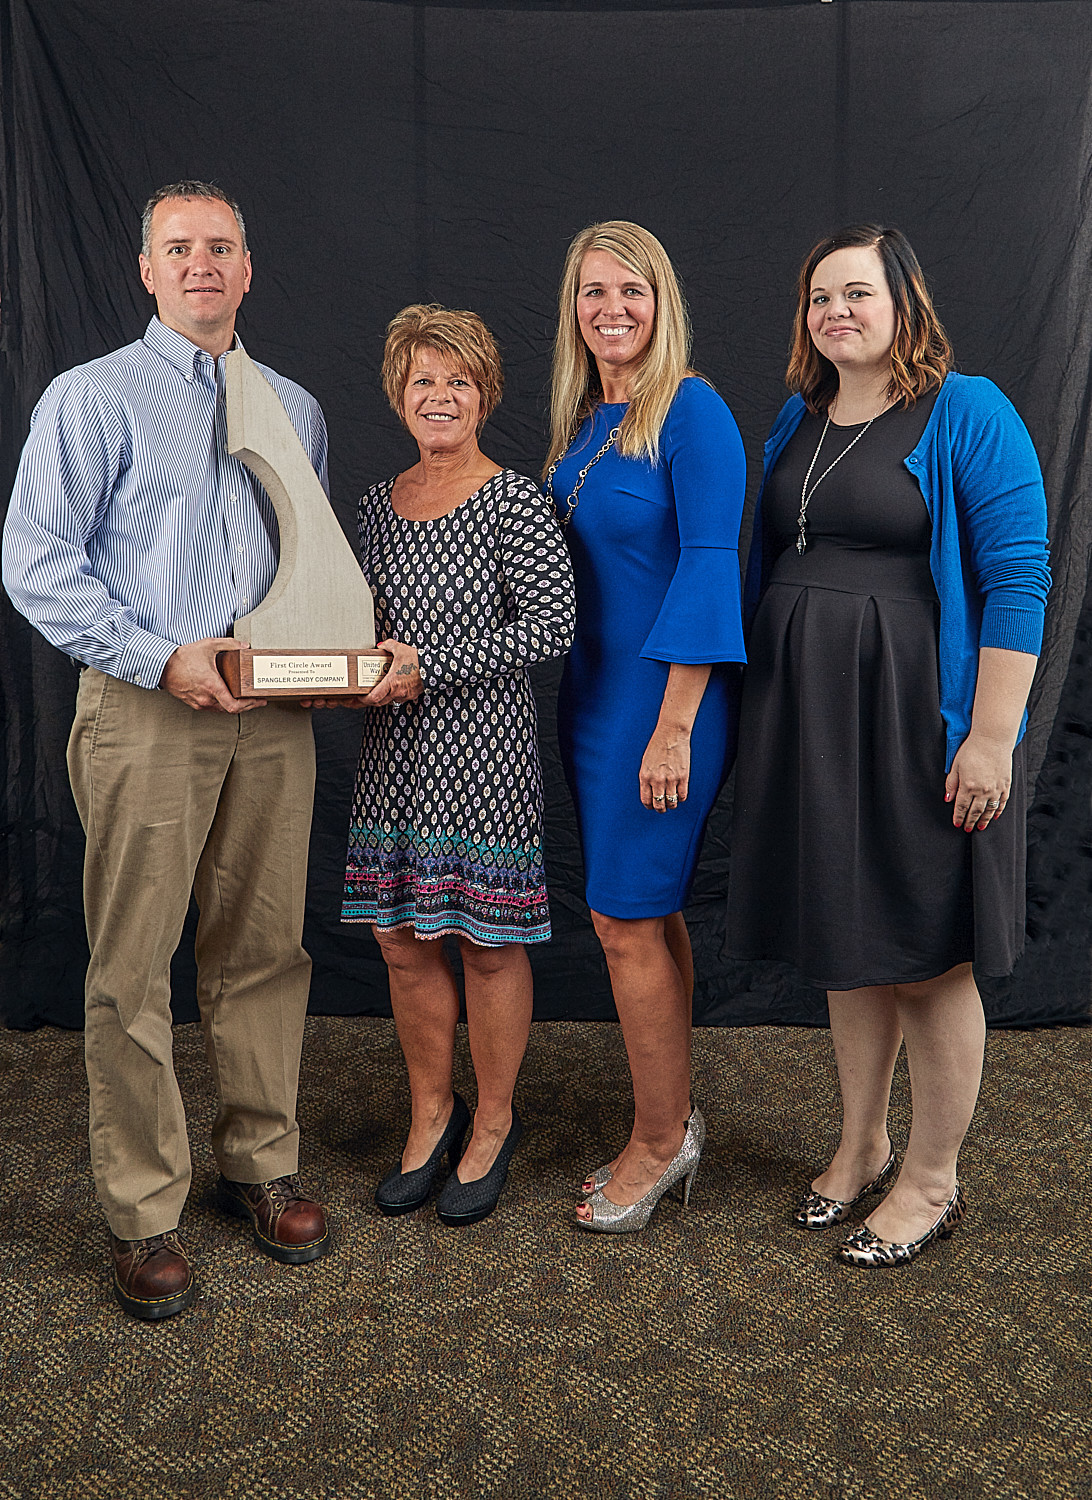 TOP OVERALL CONTRIBUTOR Allyn Luce, 2017 Campaign Chair Tracey Clark, Spangler Candy Company Chasity Yoder, UW Executive Director Jamie Vonalt, UW Executive Assistant